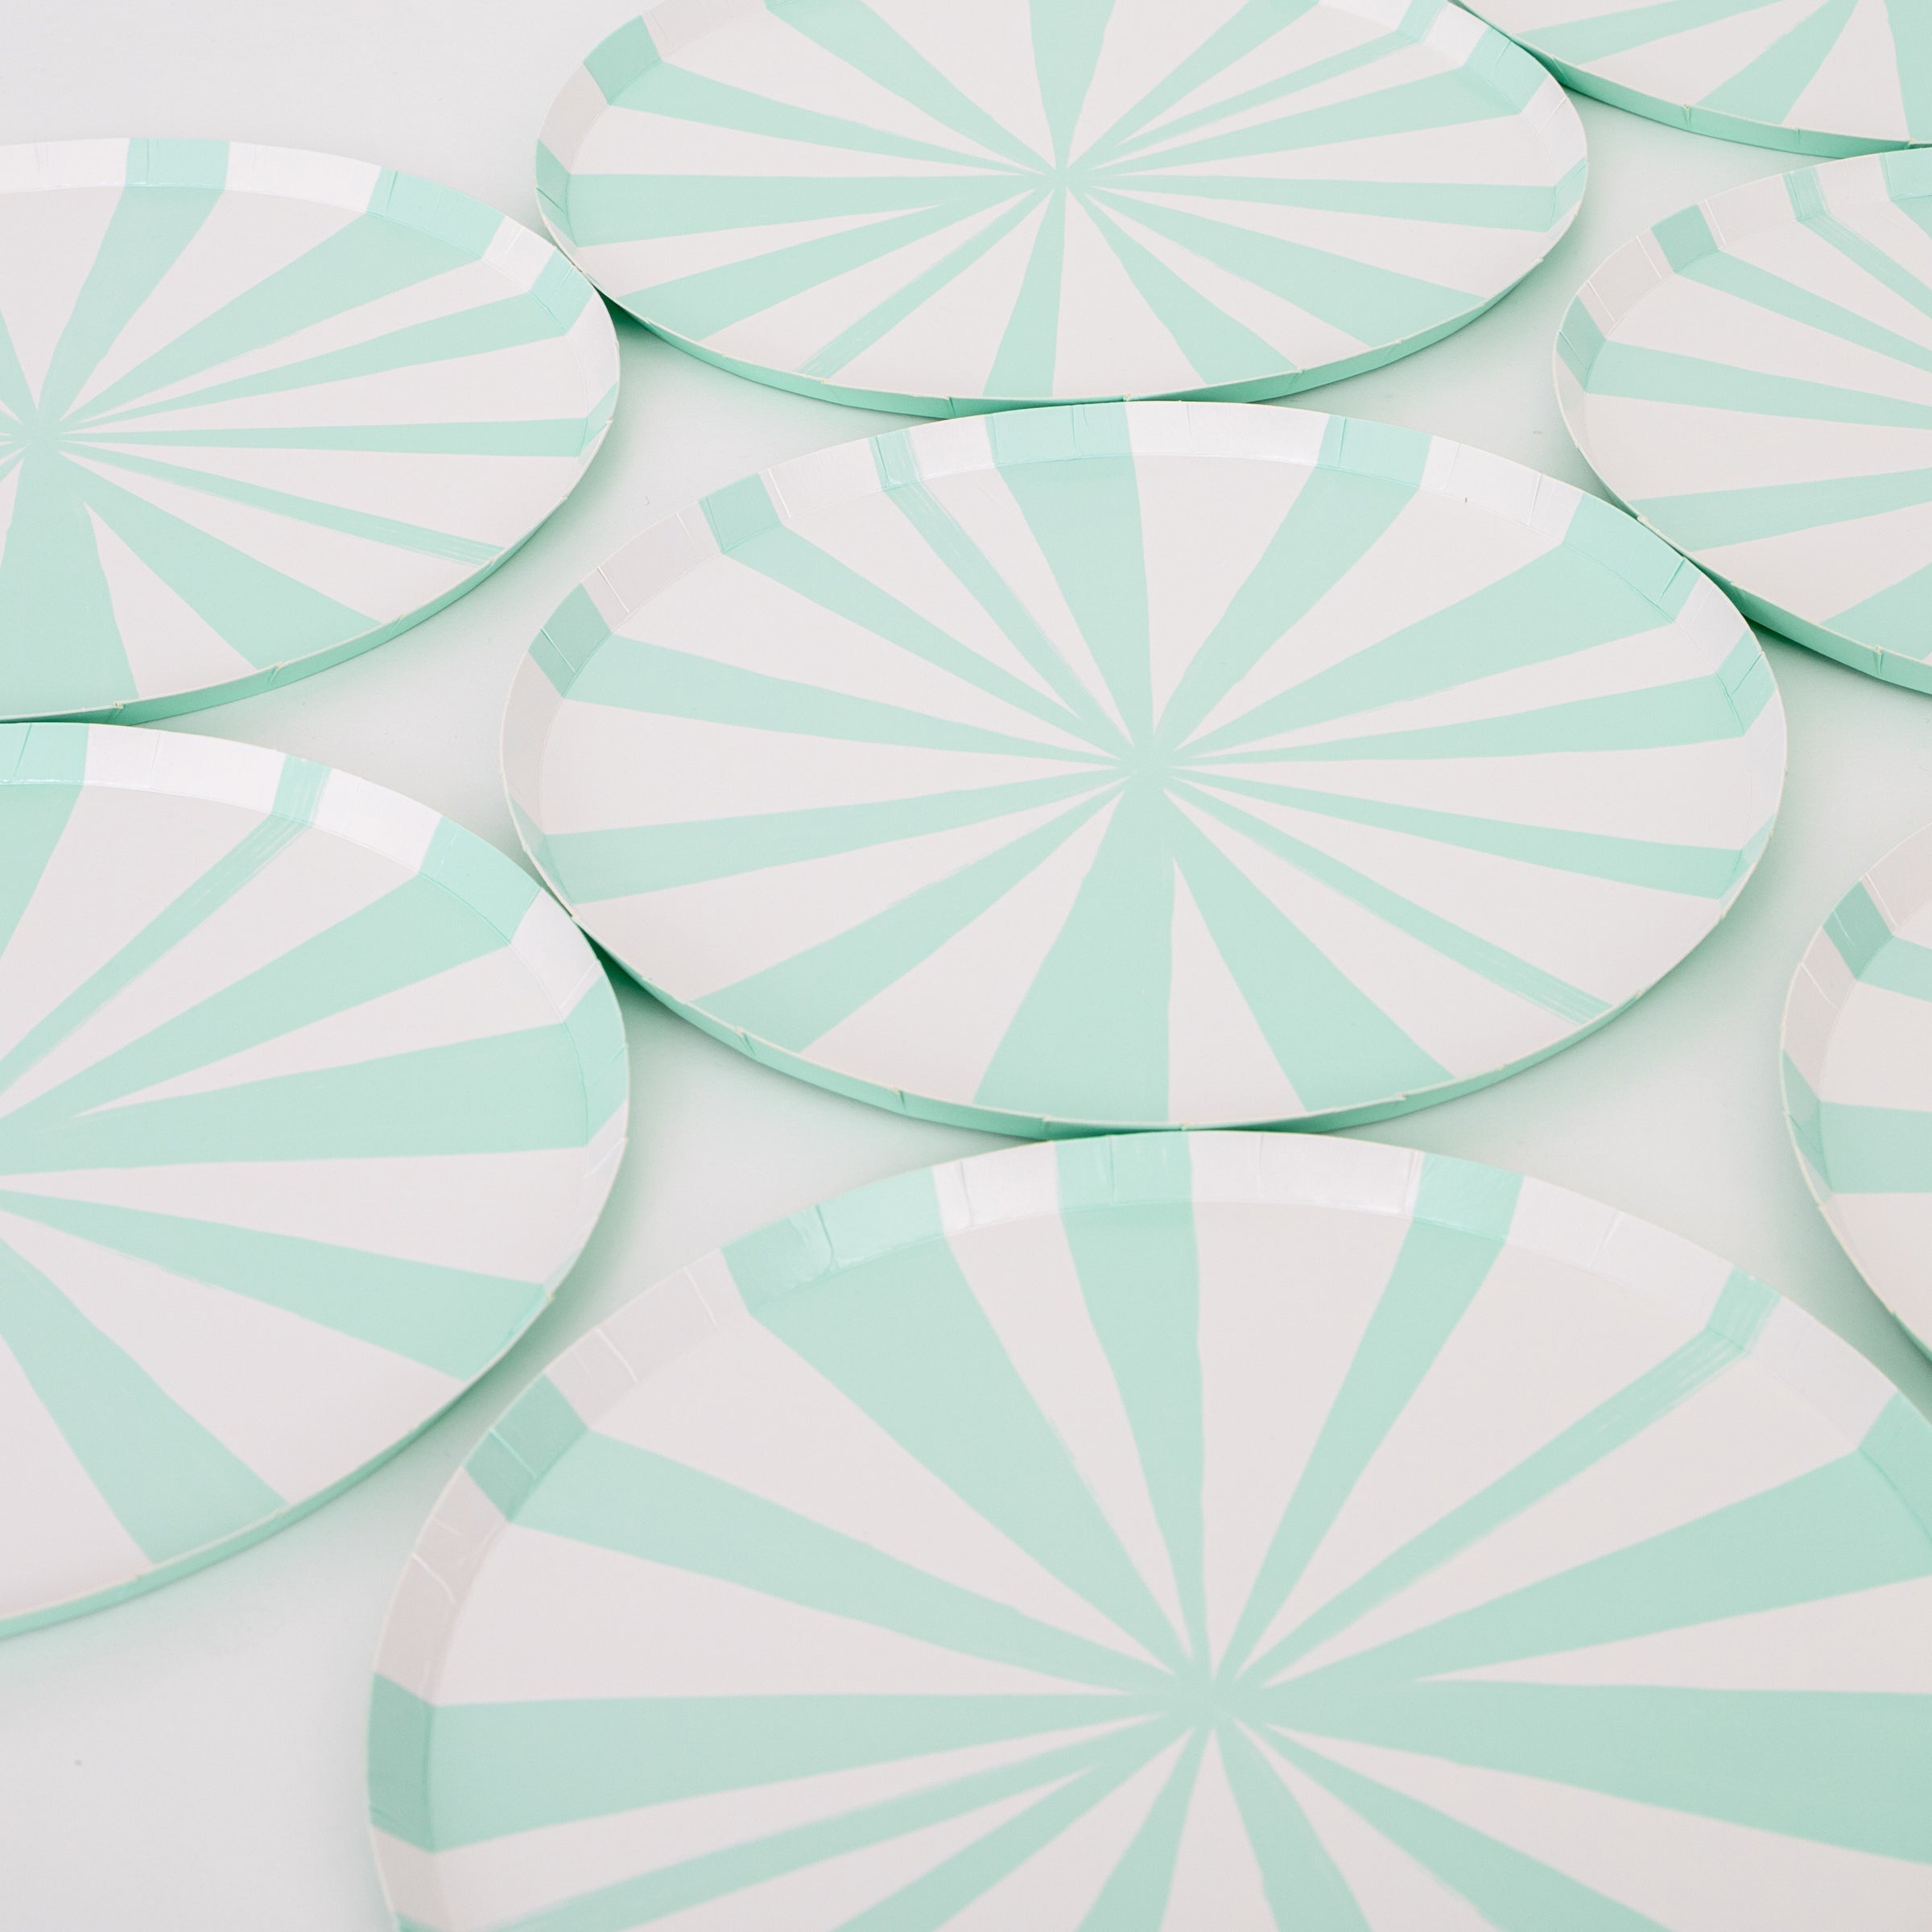 These paper plates, with mint stripes, are ideal as side plates for a dinner party or as small plates for a kids party or as cocktail plates.